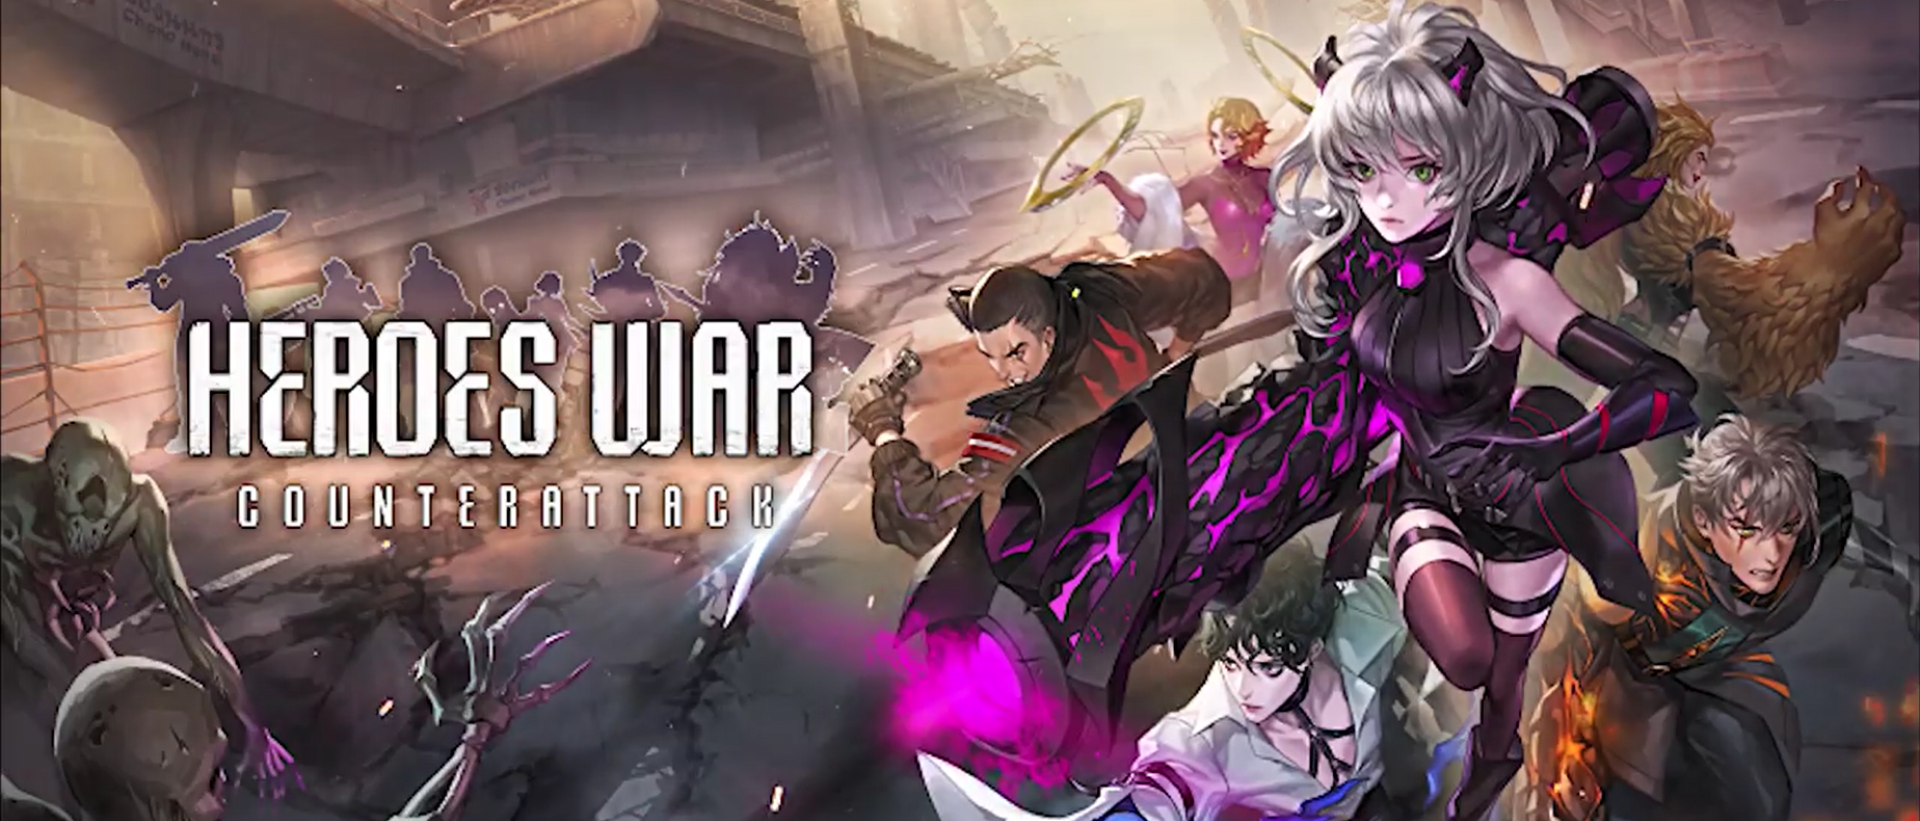 Download & Play Heroes War: Counterattack on PC & Mac with NoxPlayer (Emulator)